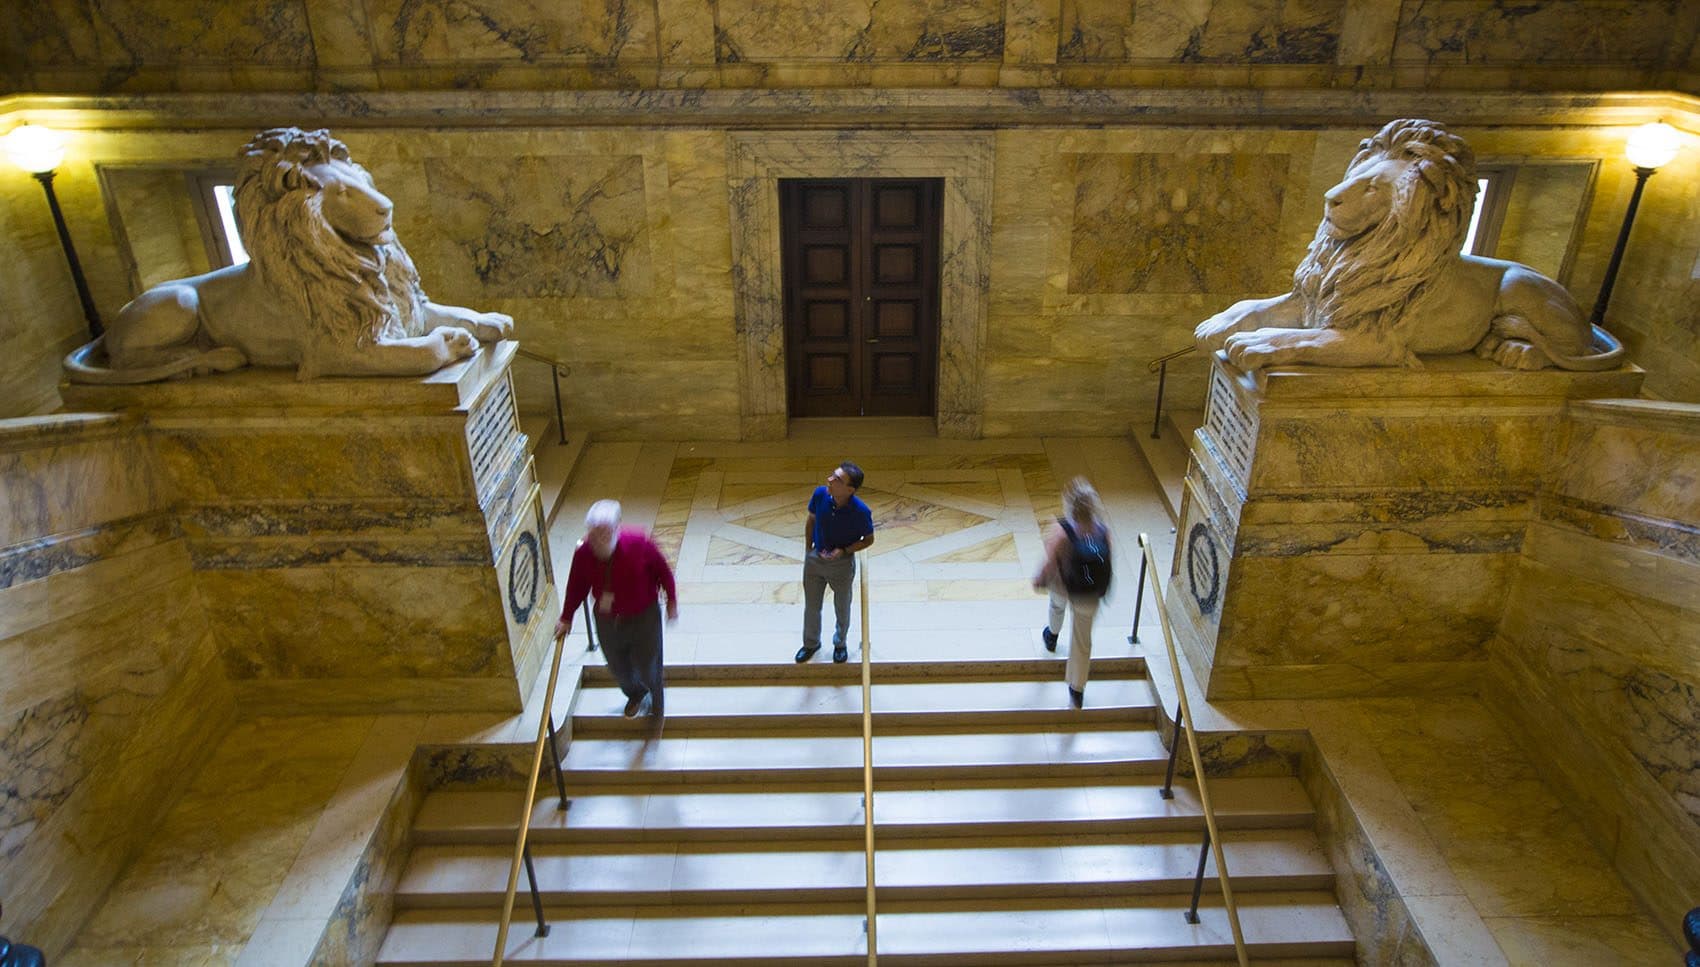 The pair of lion statues in the grand staircase at the Boston Public Library. (Jesse Costa/WBUR)